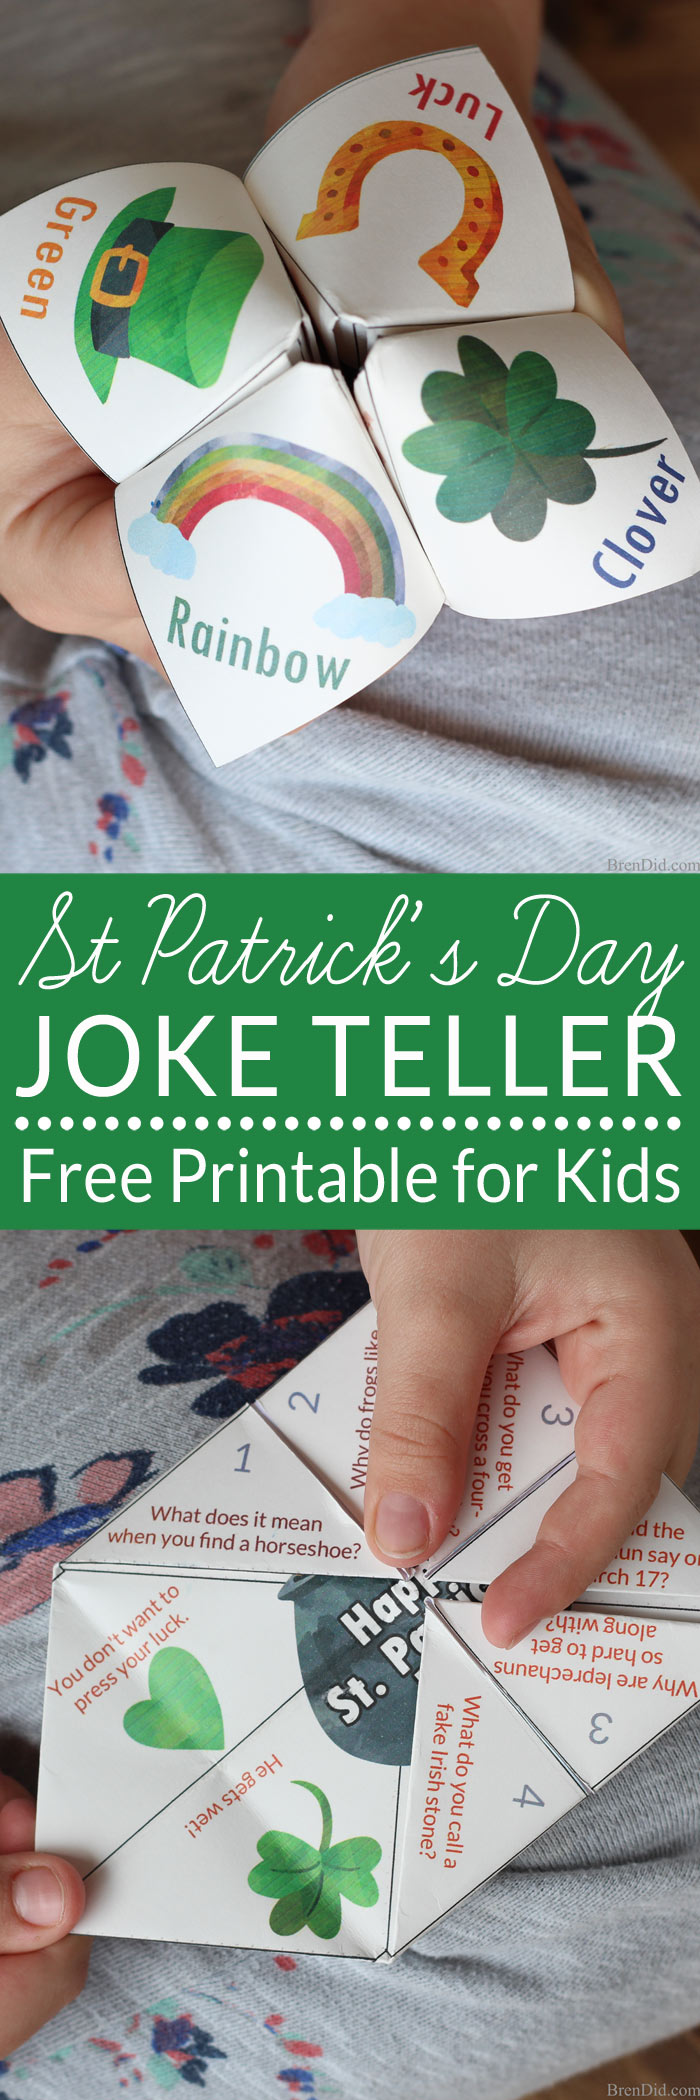 A joke teller is a great St. Patrick’s Day treat for kids. The free printable project (with easy folding instructions) takes less than 5 minutes to complete. The joke teller (sometimes called a cootie catcher or fortune teller) contains 8 fun St. Patrick’s Day jokes for kids and fun Saint Patrick’s Day designs. It’s the perfect non-candy treat for all ages.